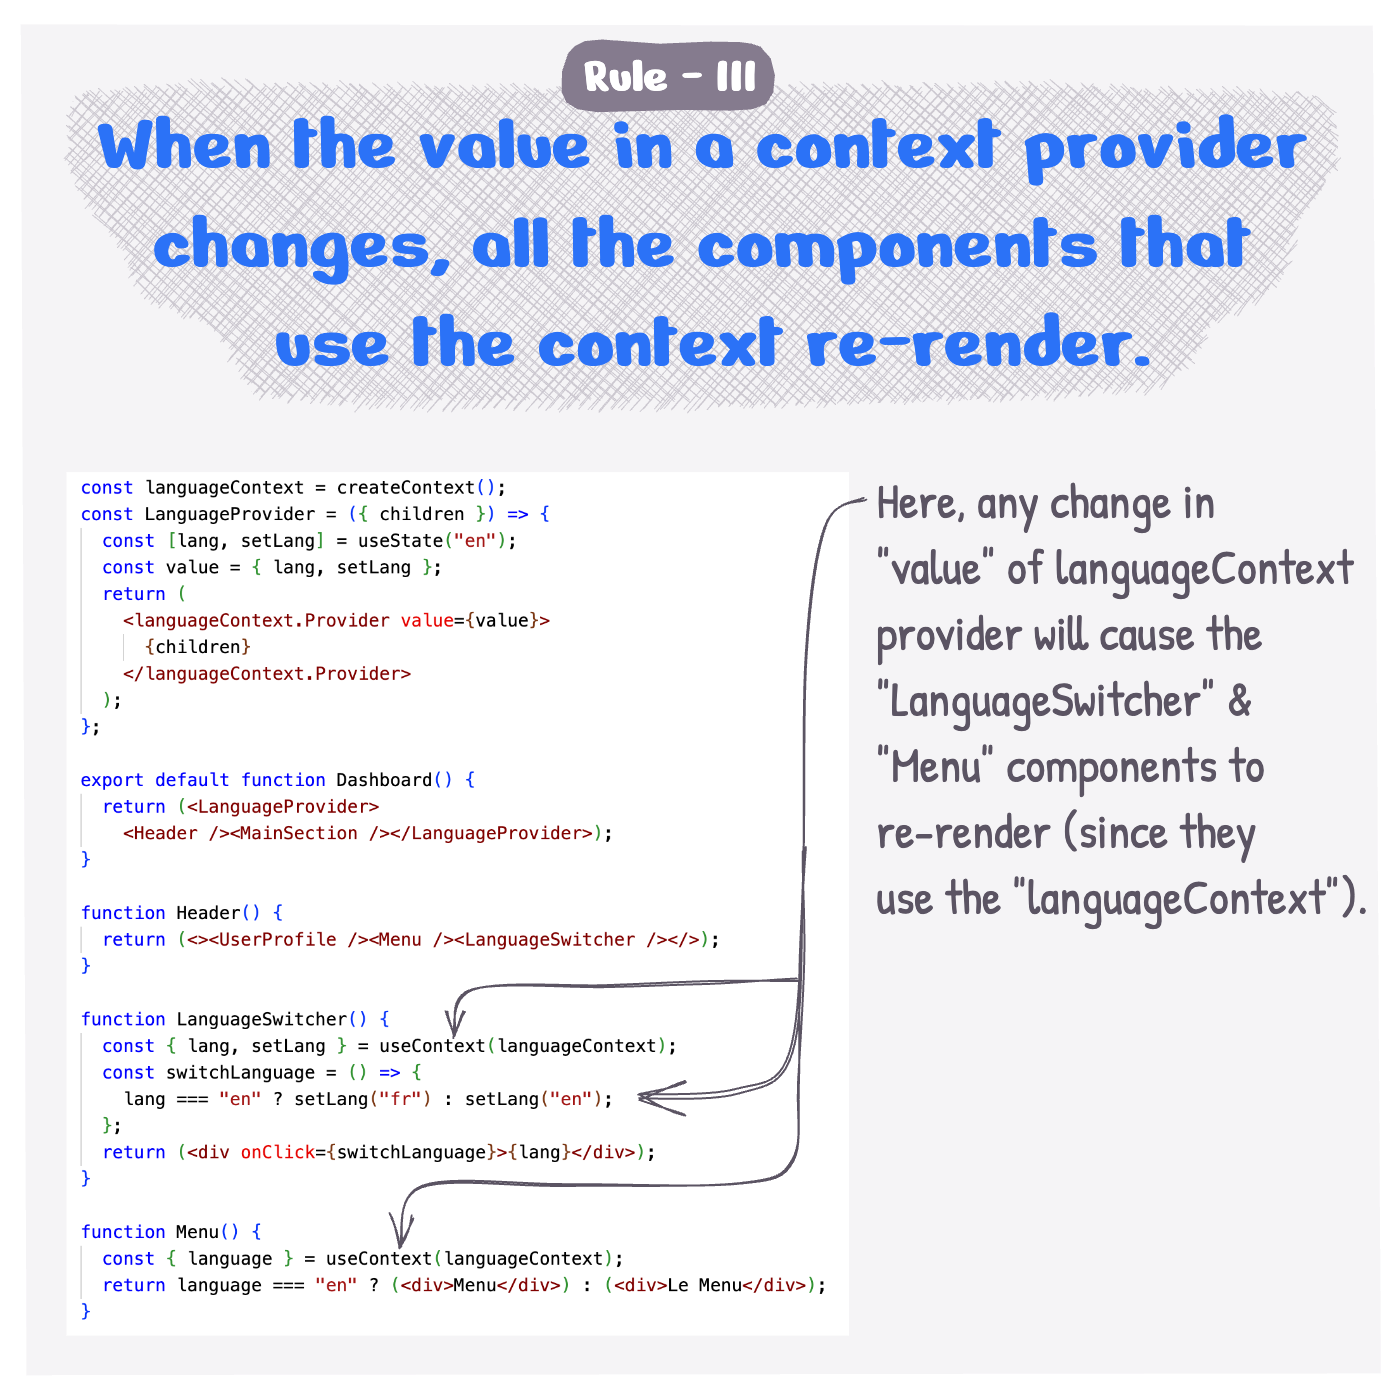 When the value in a context provider changes, all the components using the context re-render.